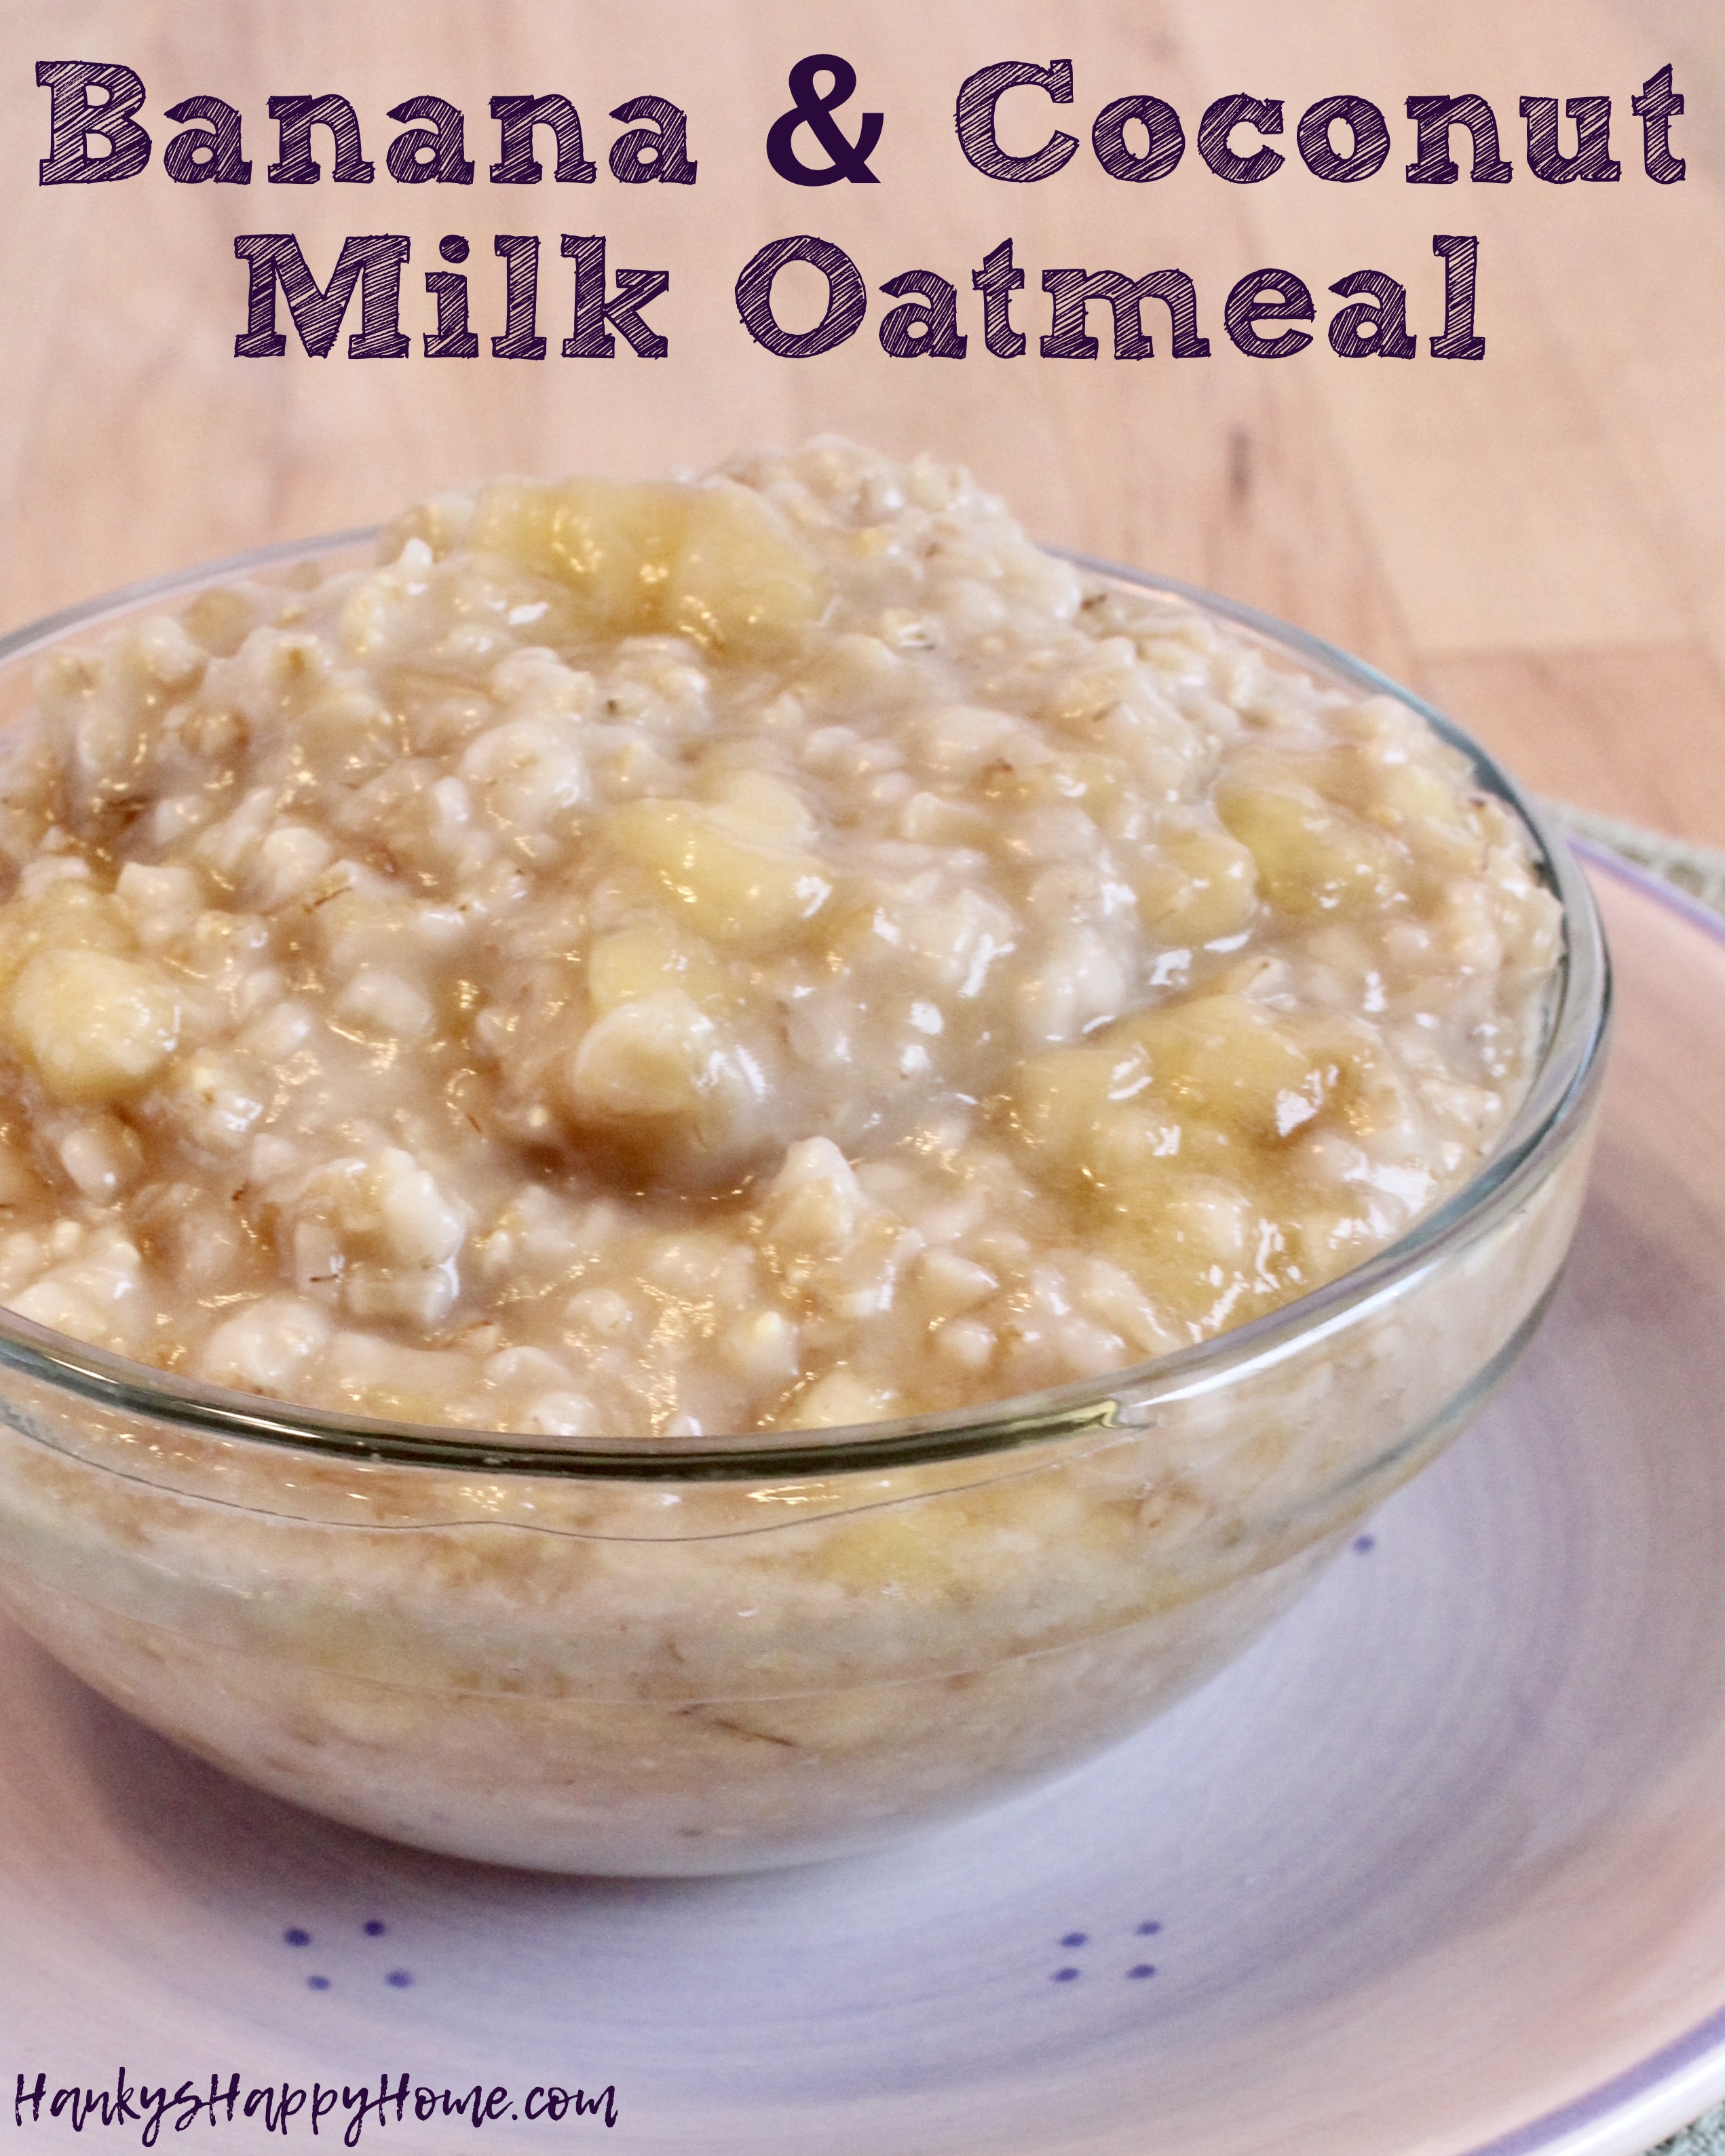 This Banana & Coconut Milk Oatmeal combines wholesome oatmeal, sweet bananas, and creamy coconut milk to make a simply delicious breakfast!